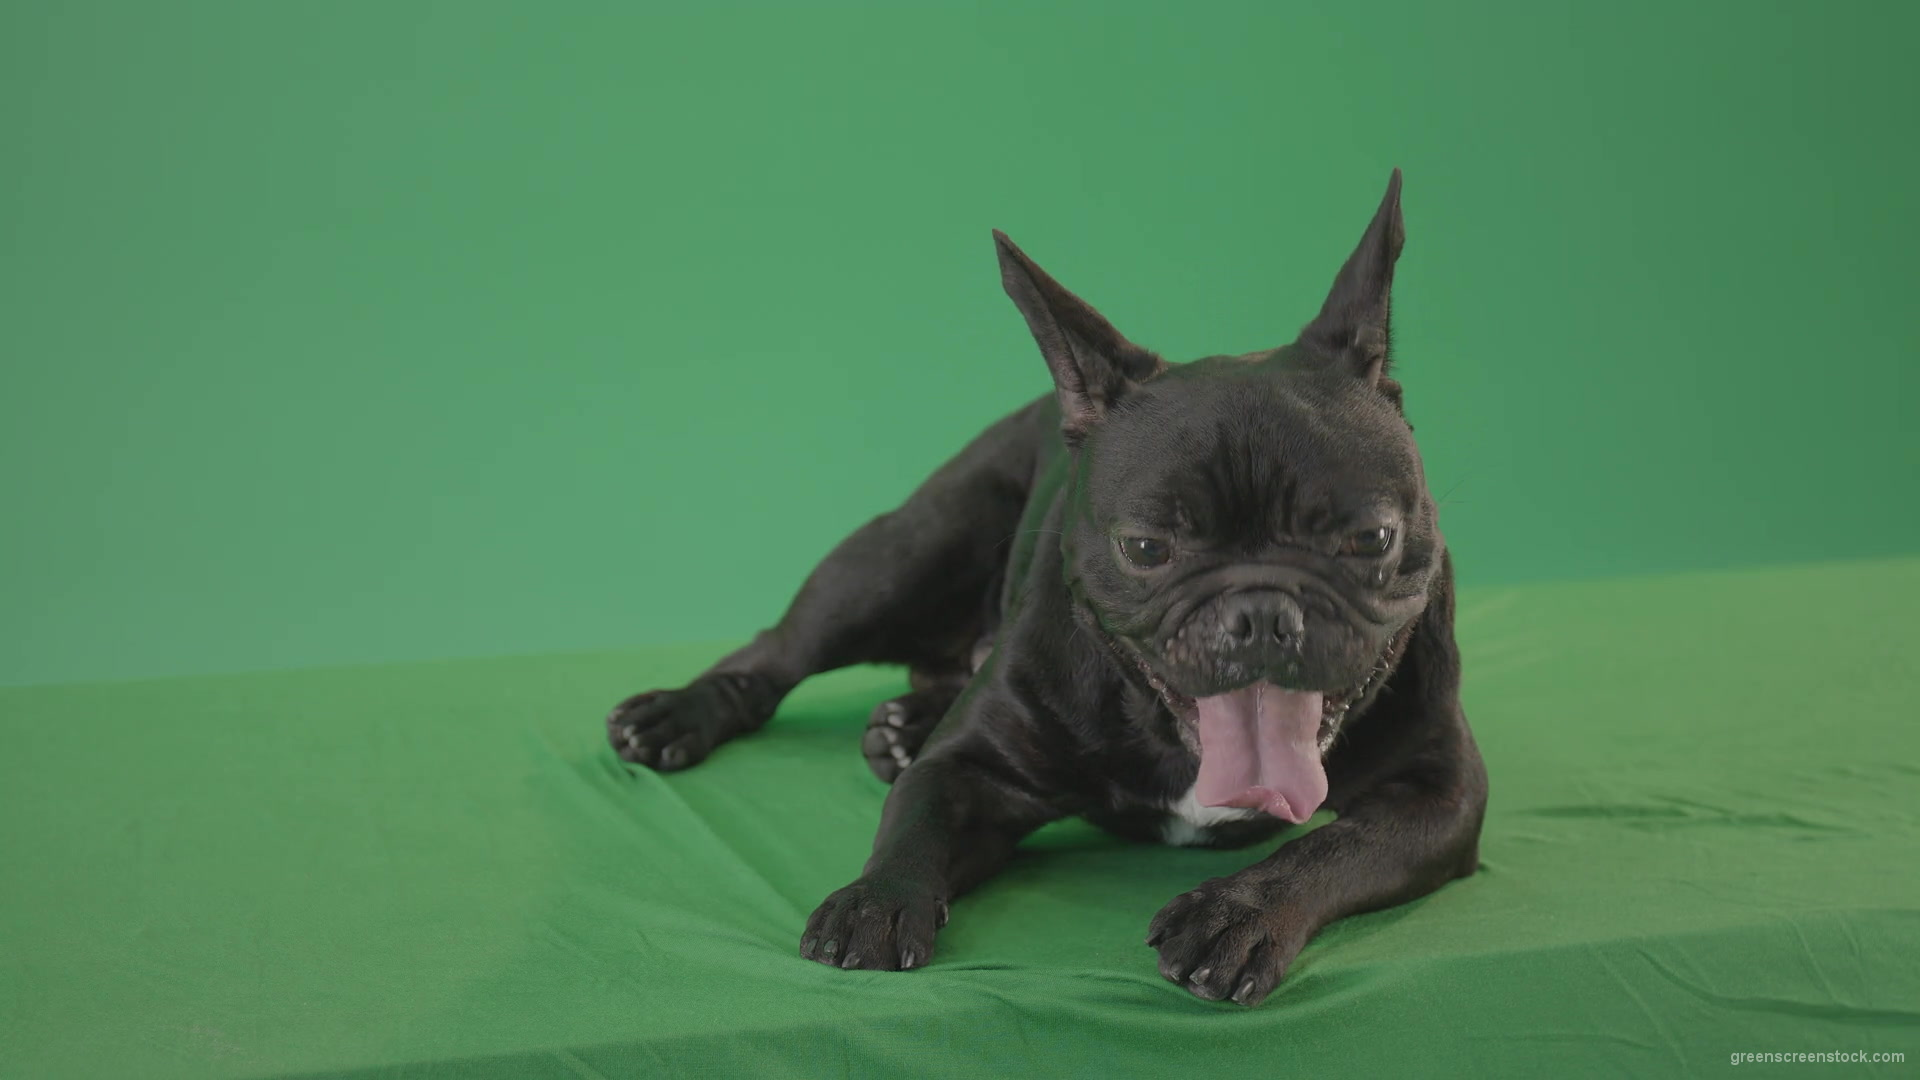 Boring-black-French-Bulldog-chilling-like-a-Bos-on-green-screen-4K-Video-Footage-1920_008 Green Screen Stock